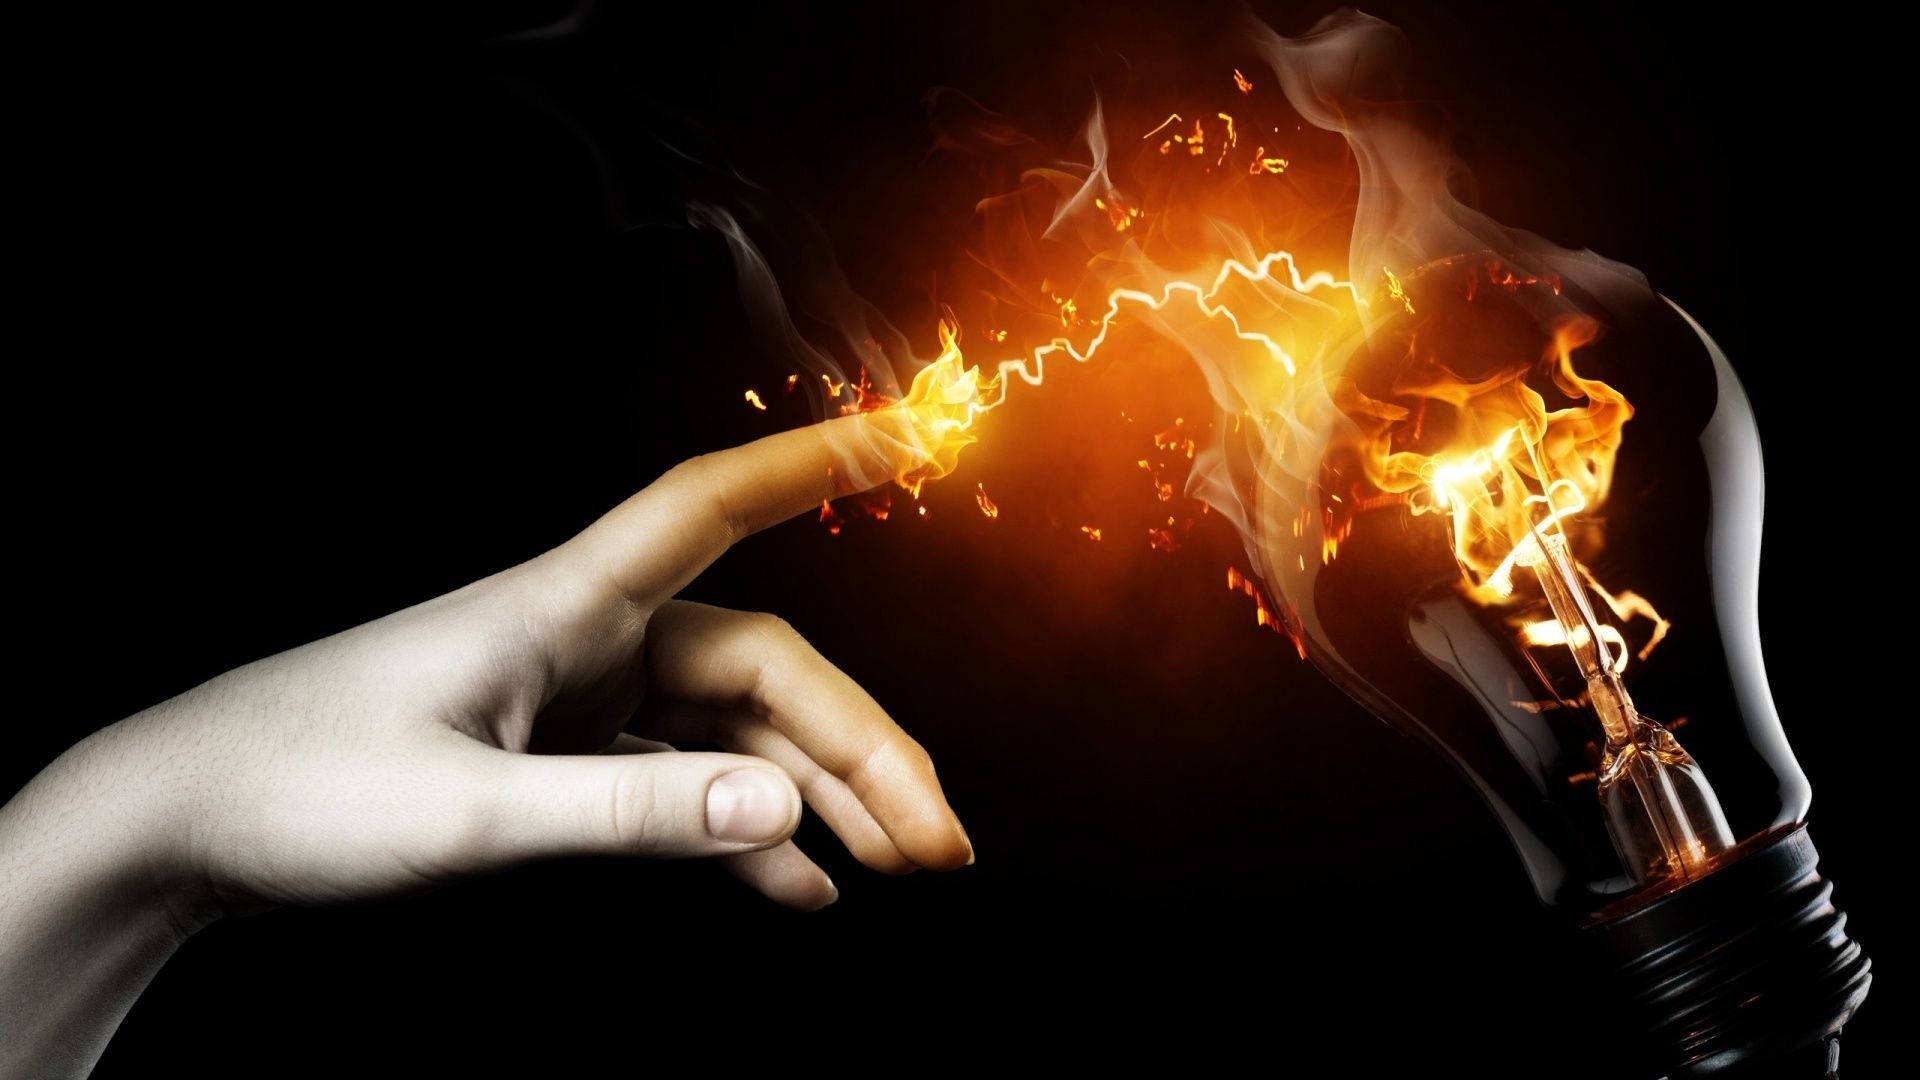 Electricity Striking Fire On Hand Wallpaper